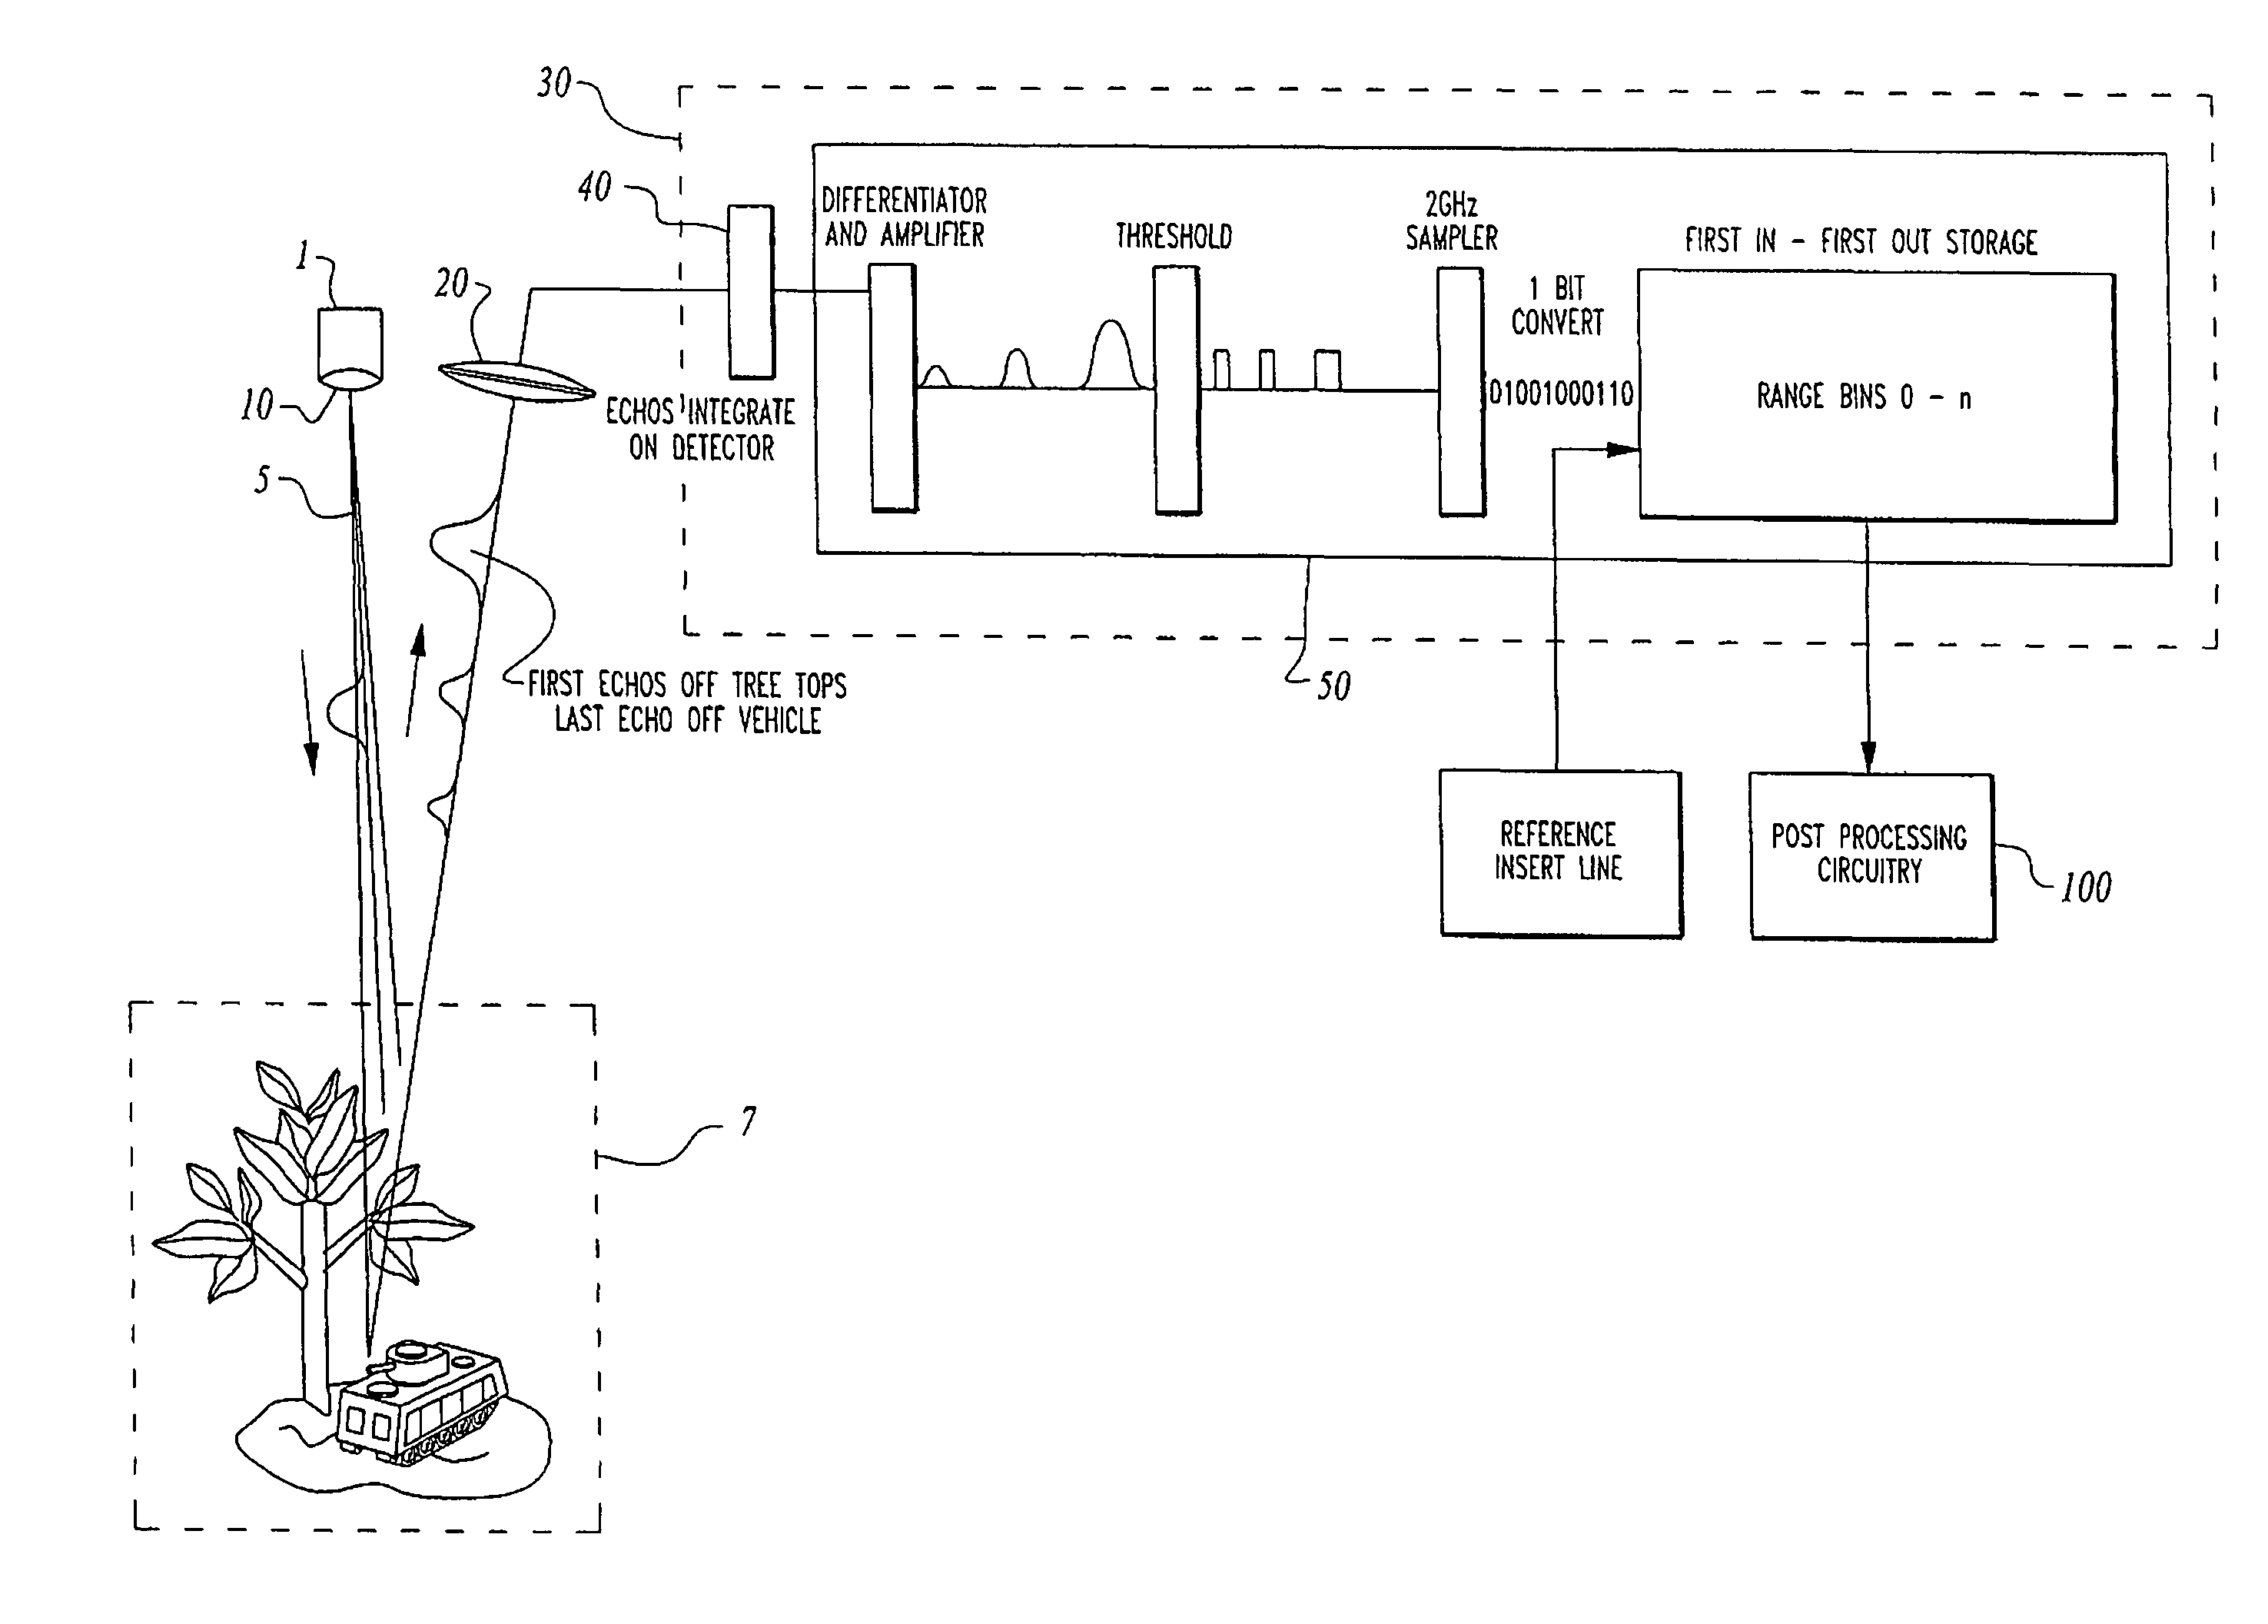 Three-dimensional LADAR module with alignment reference insert circuitry comprising high density interconnect structure